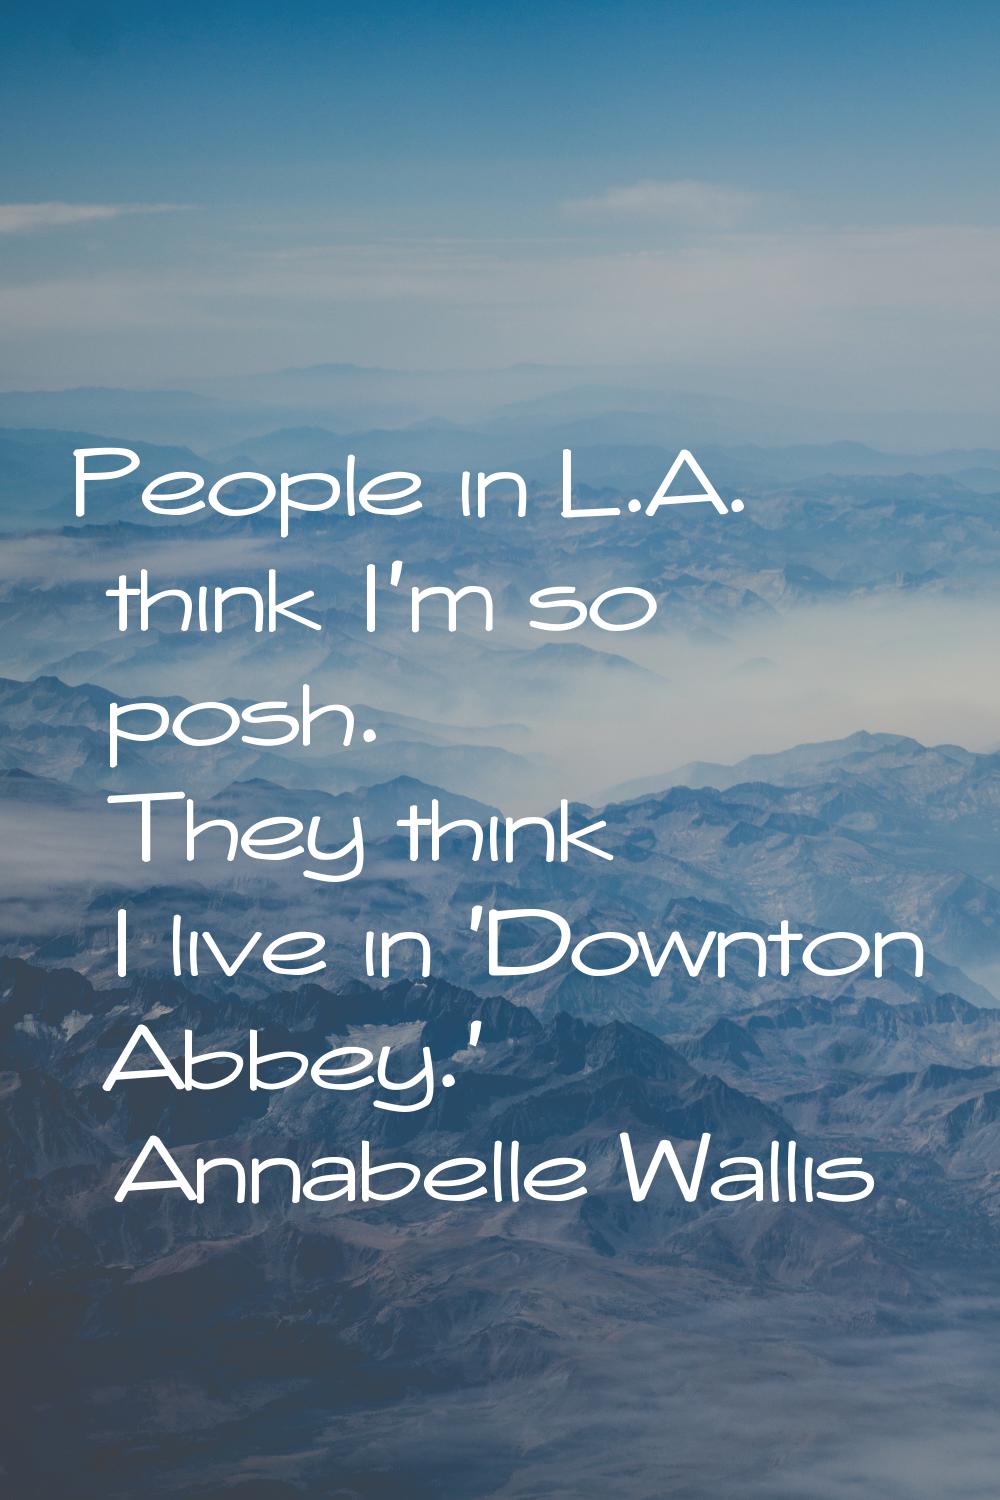 People in L.A. think I'm so posh. They think I live in 'Downton Abbey.'